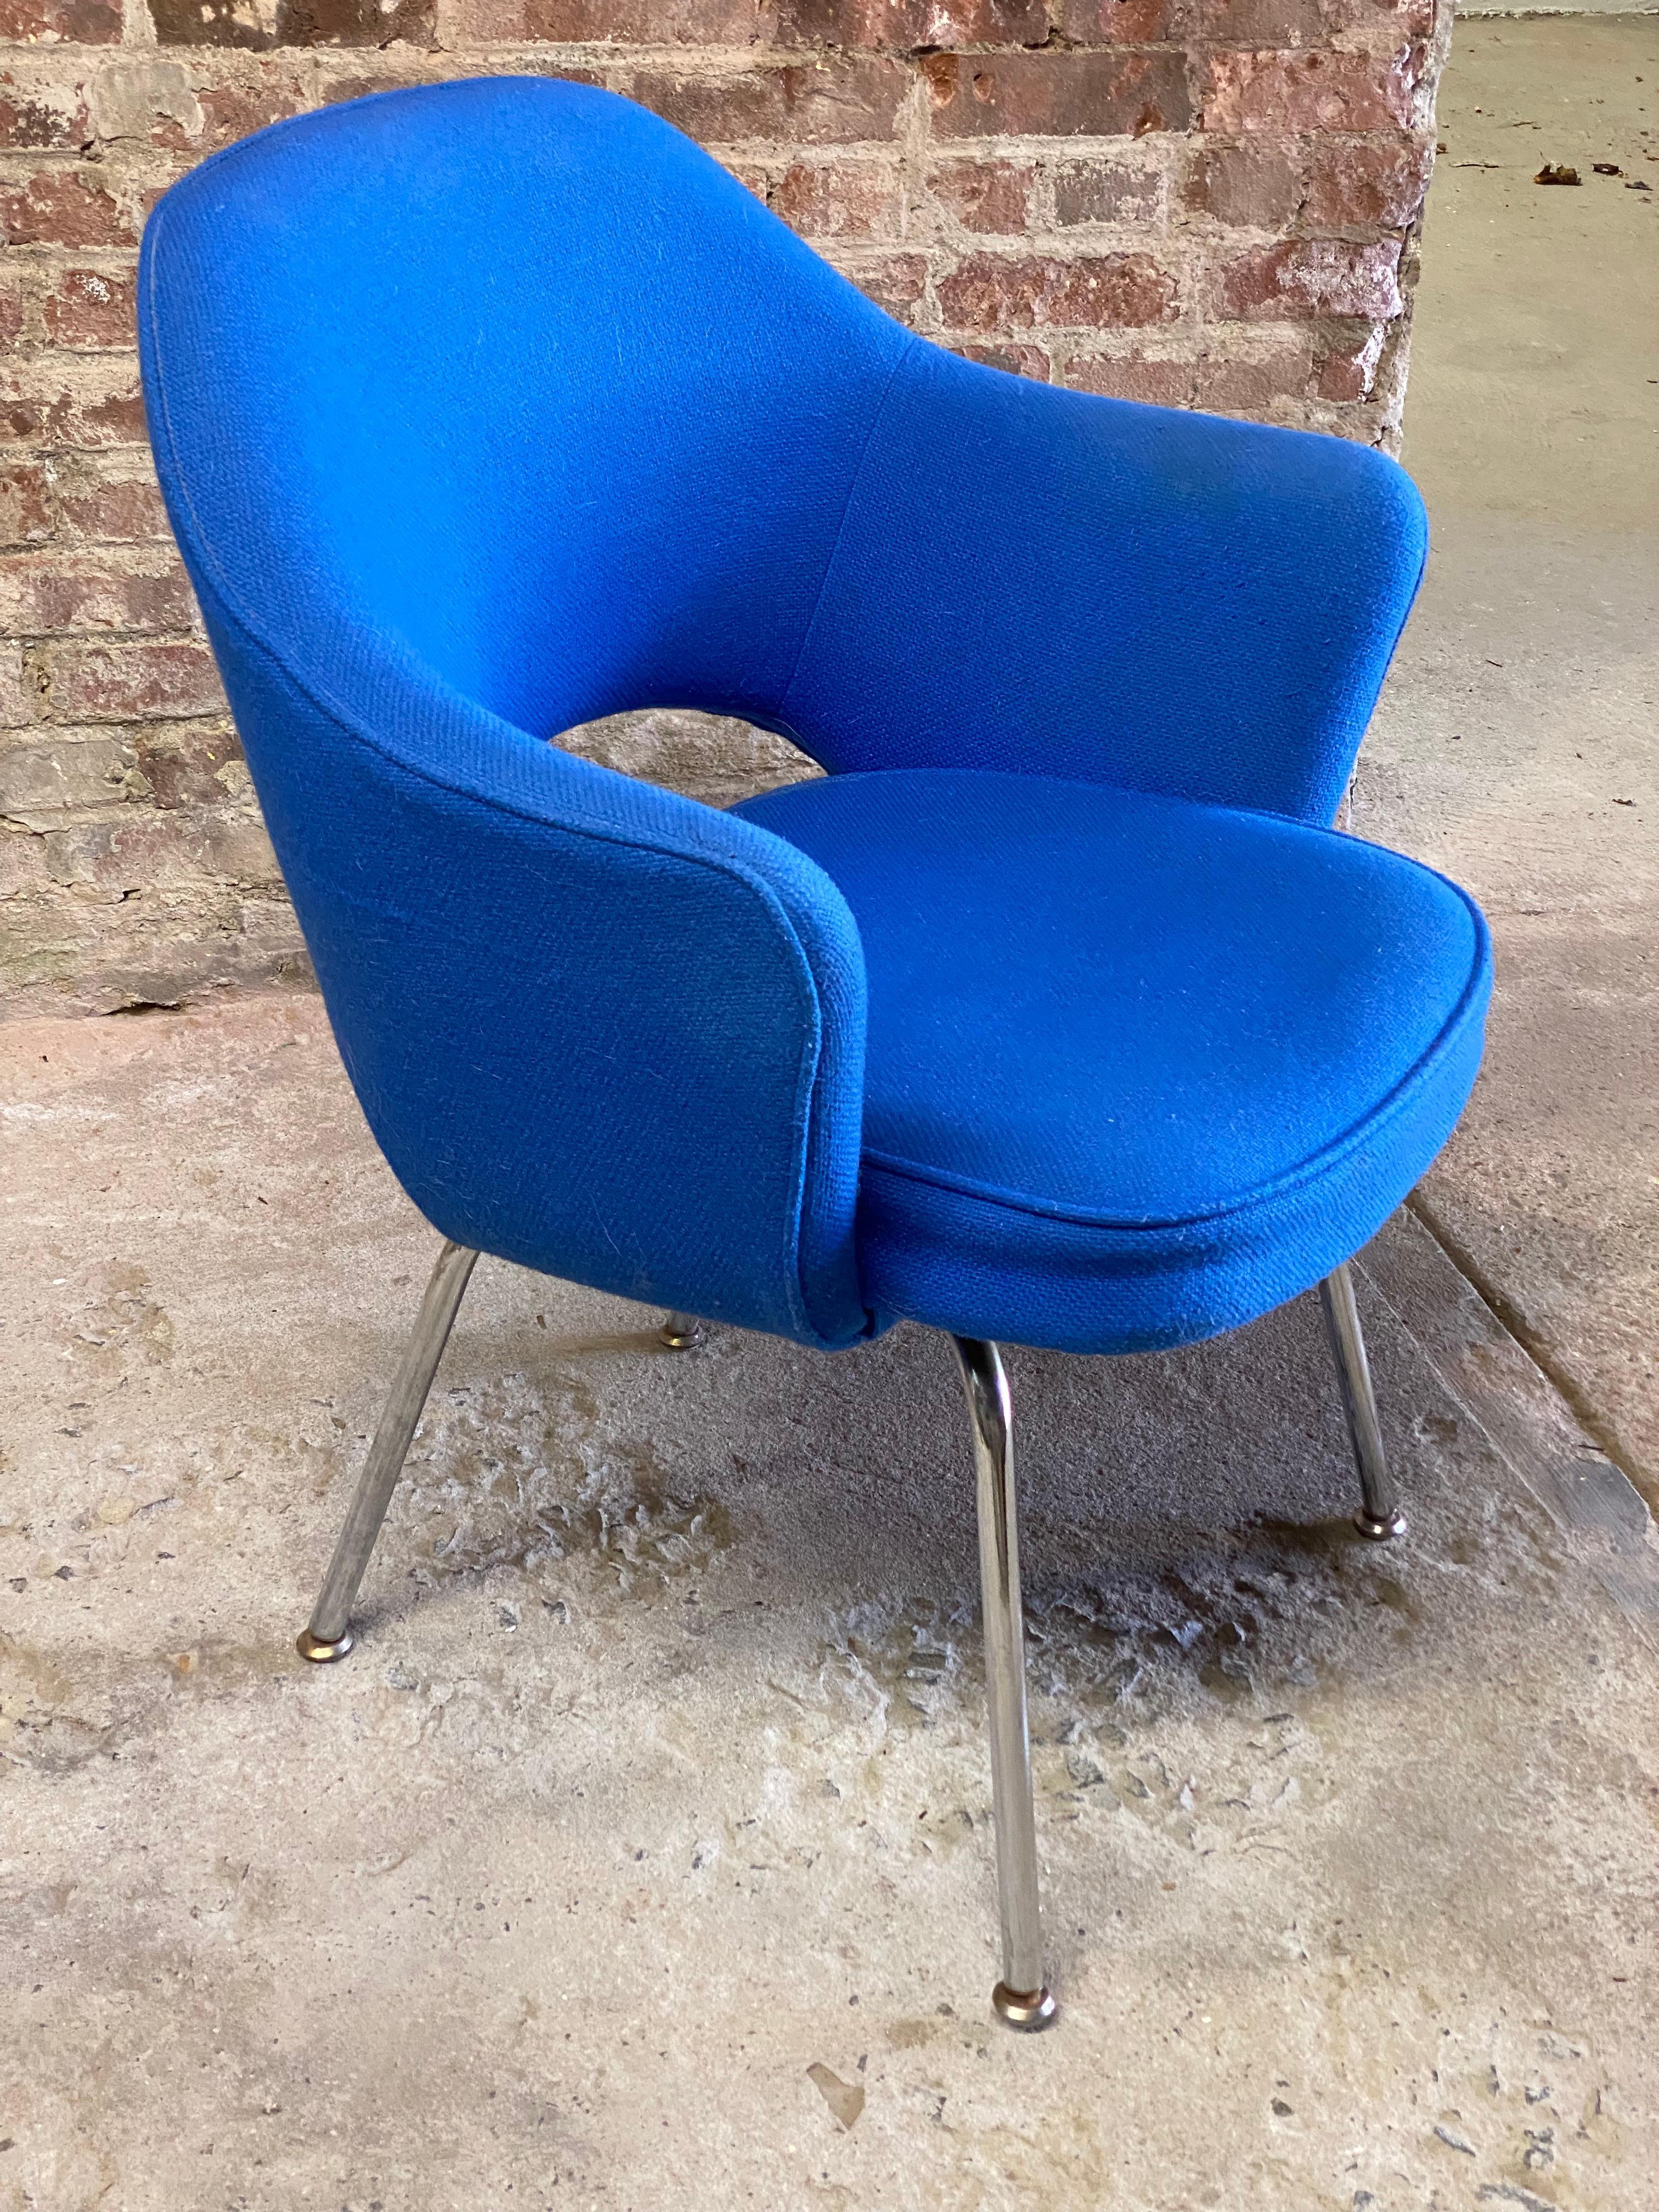 A nice example of a Eero Saarinen Model 71 Executive armchair from Knoll International. This particular chair came directly from the IBM offices in the Poughkeepsie, New York campus. Circa 1970. Signed on the bottom with the Knoll International